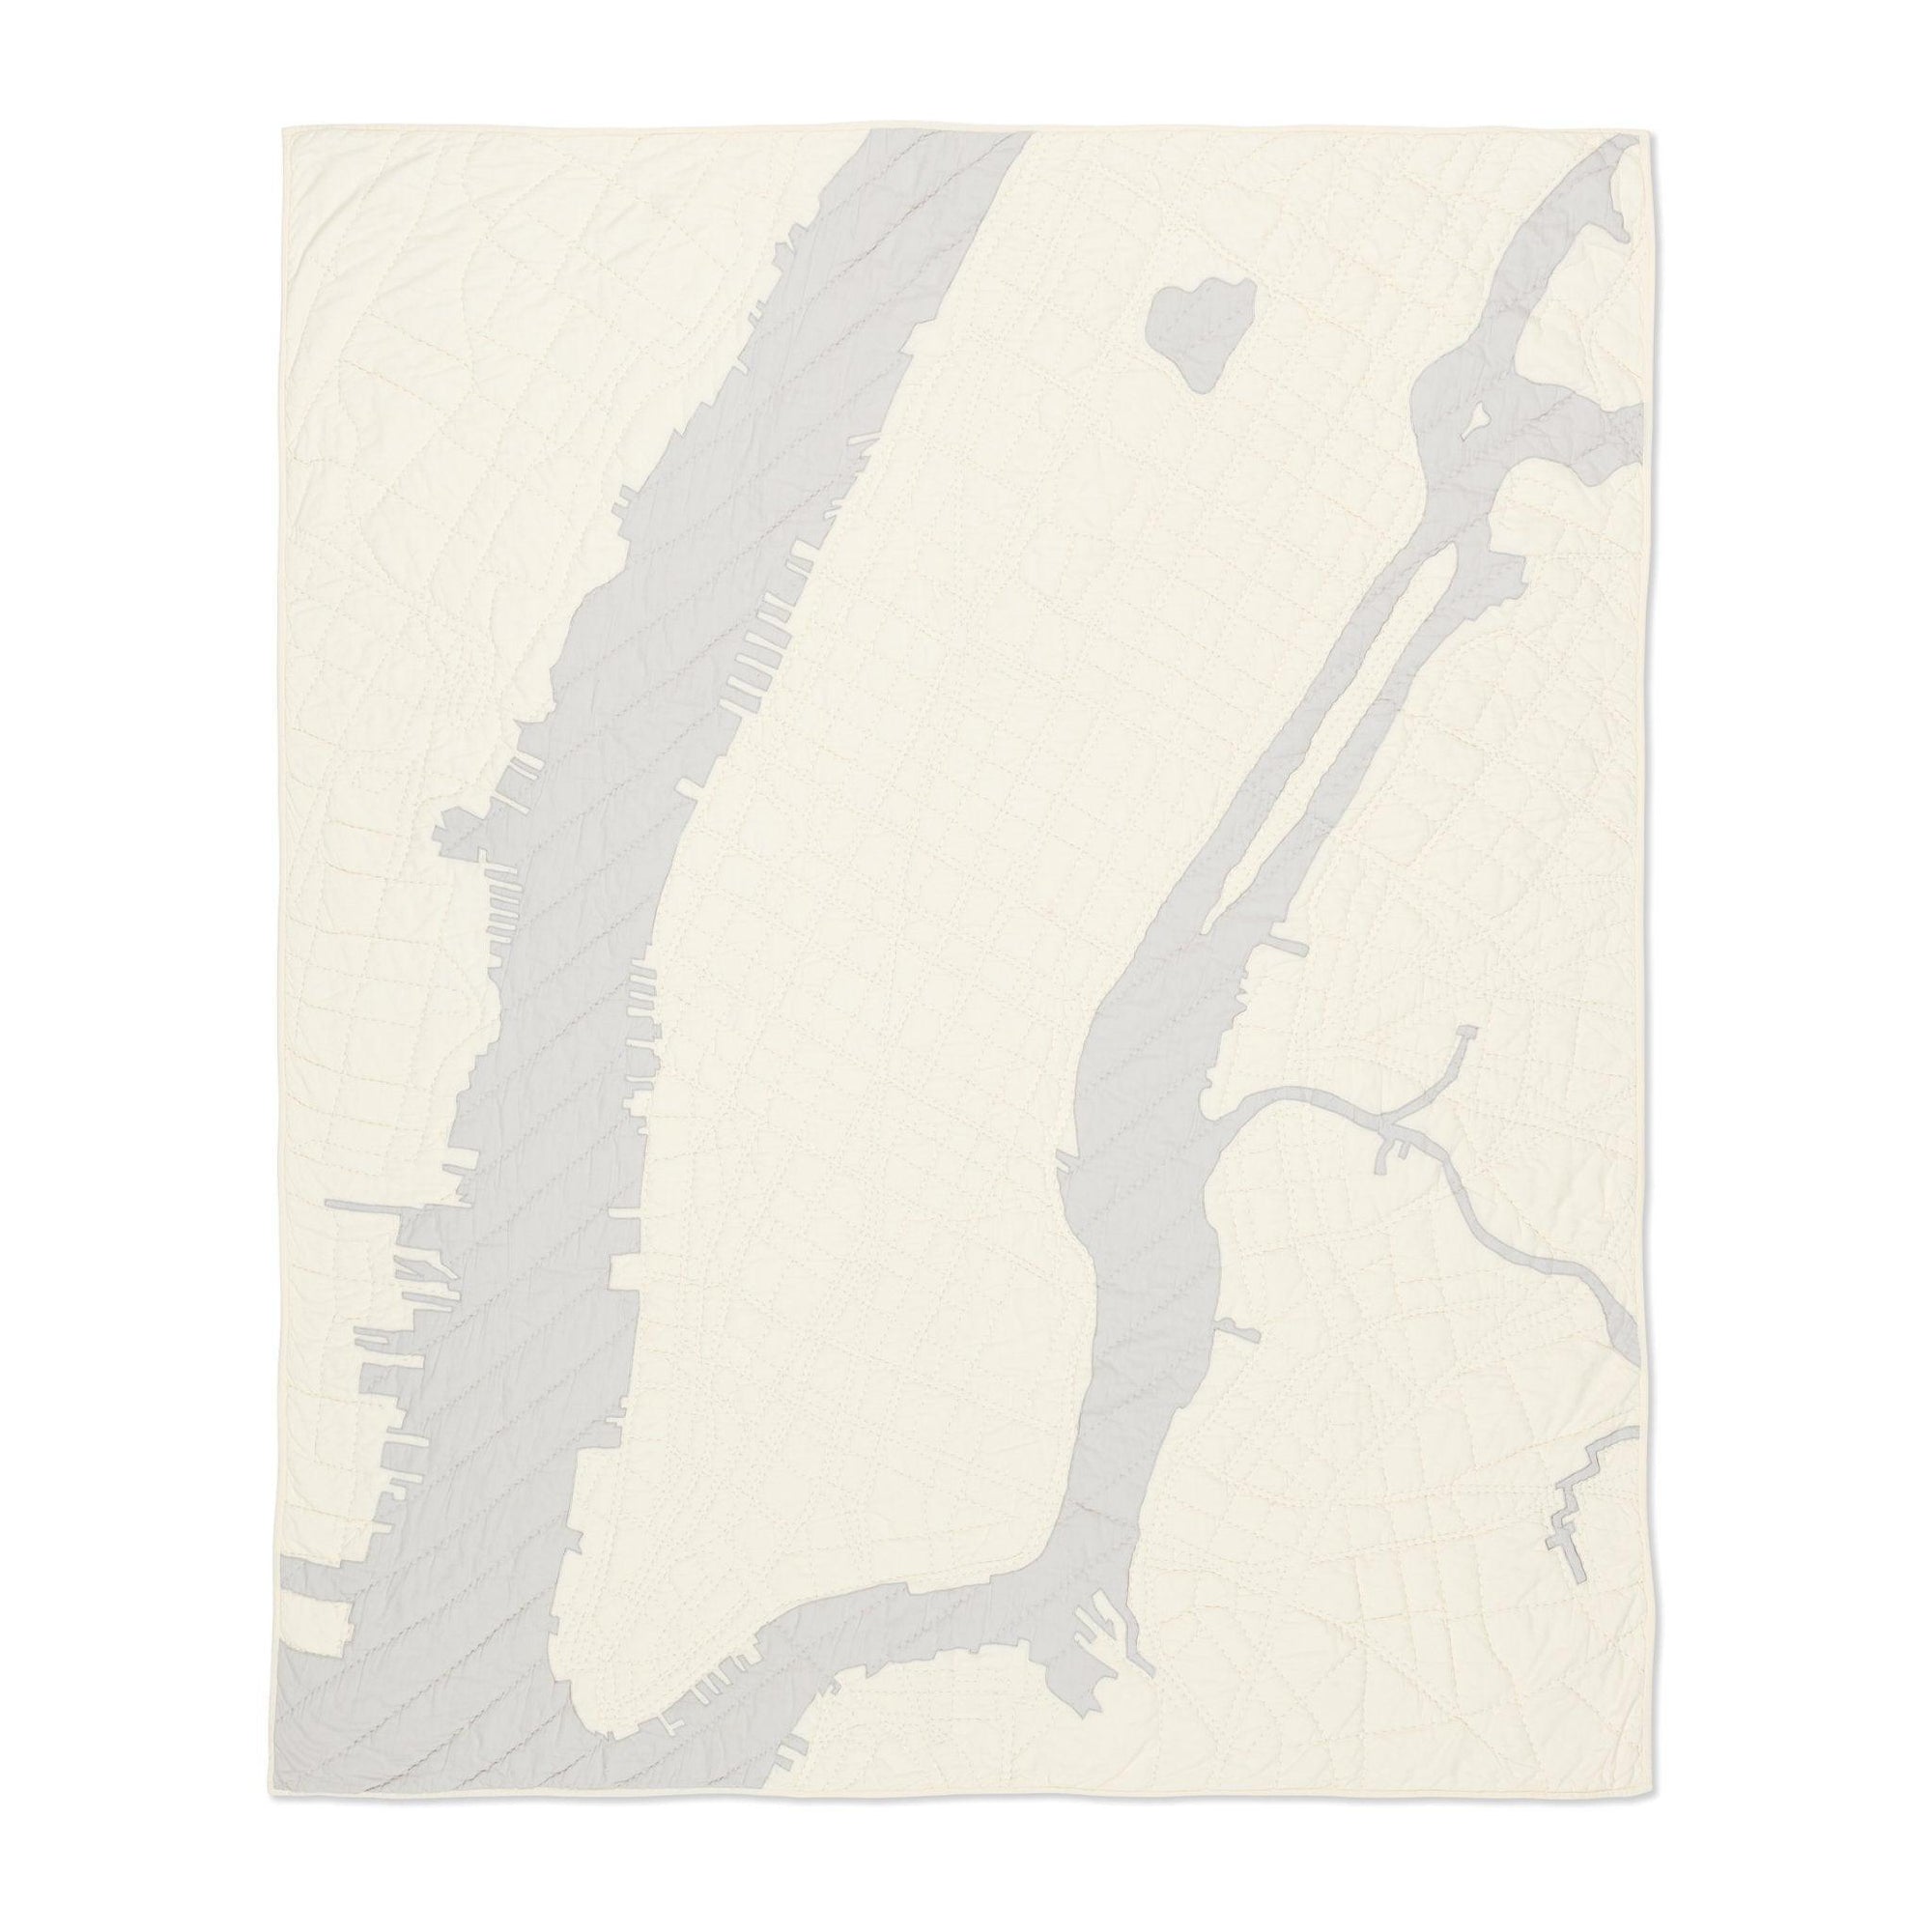 Heirloom quilt, a hand-stitched map of New York City with ivory land and gray water.